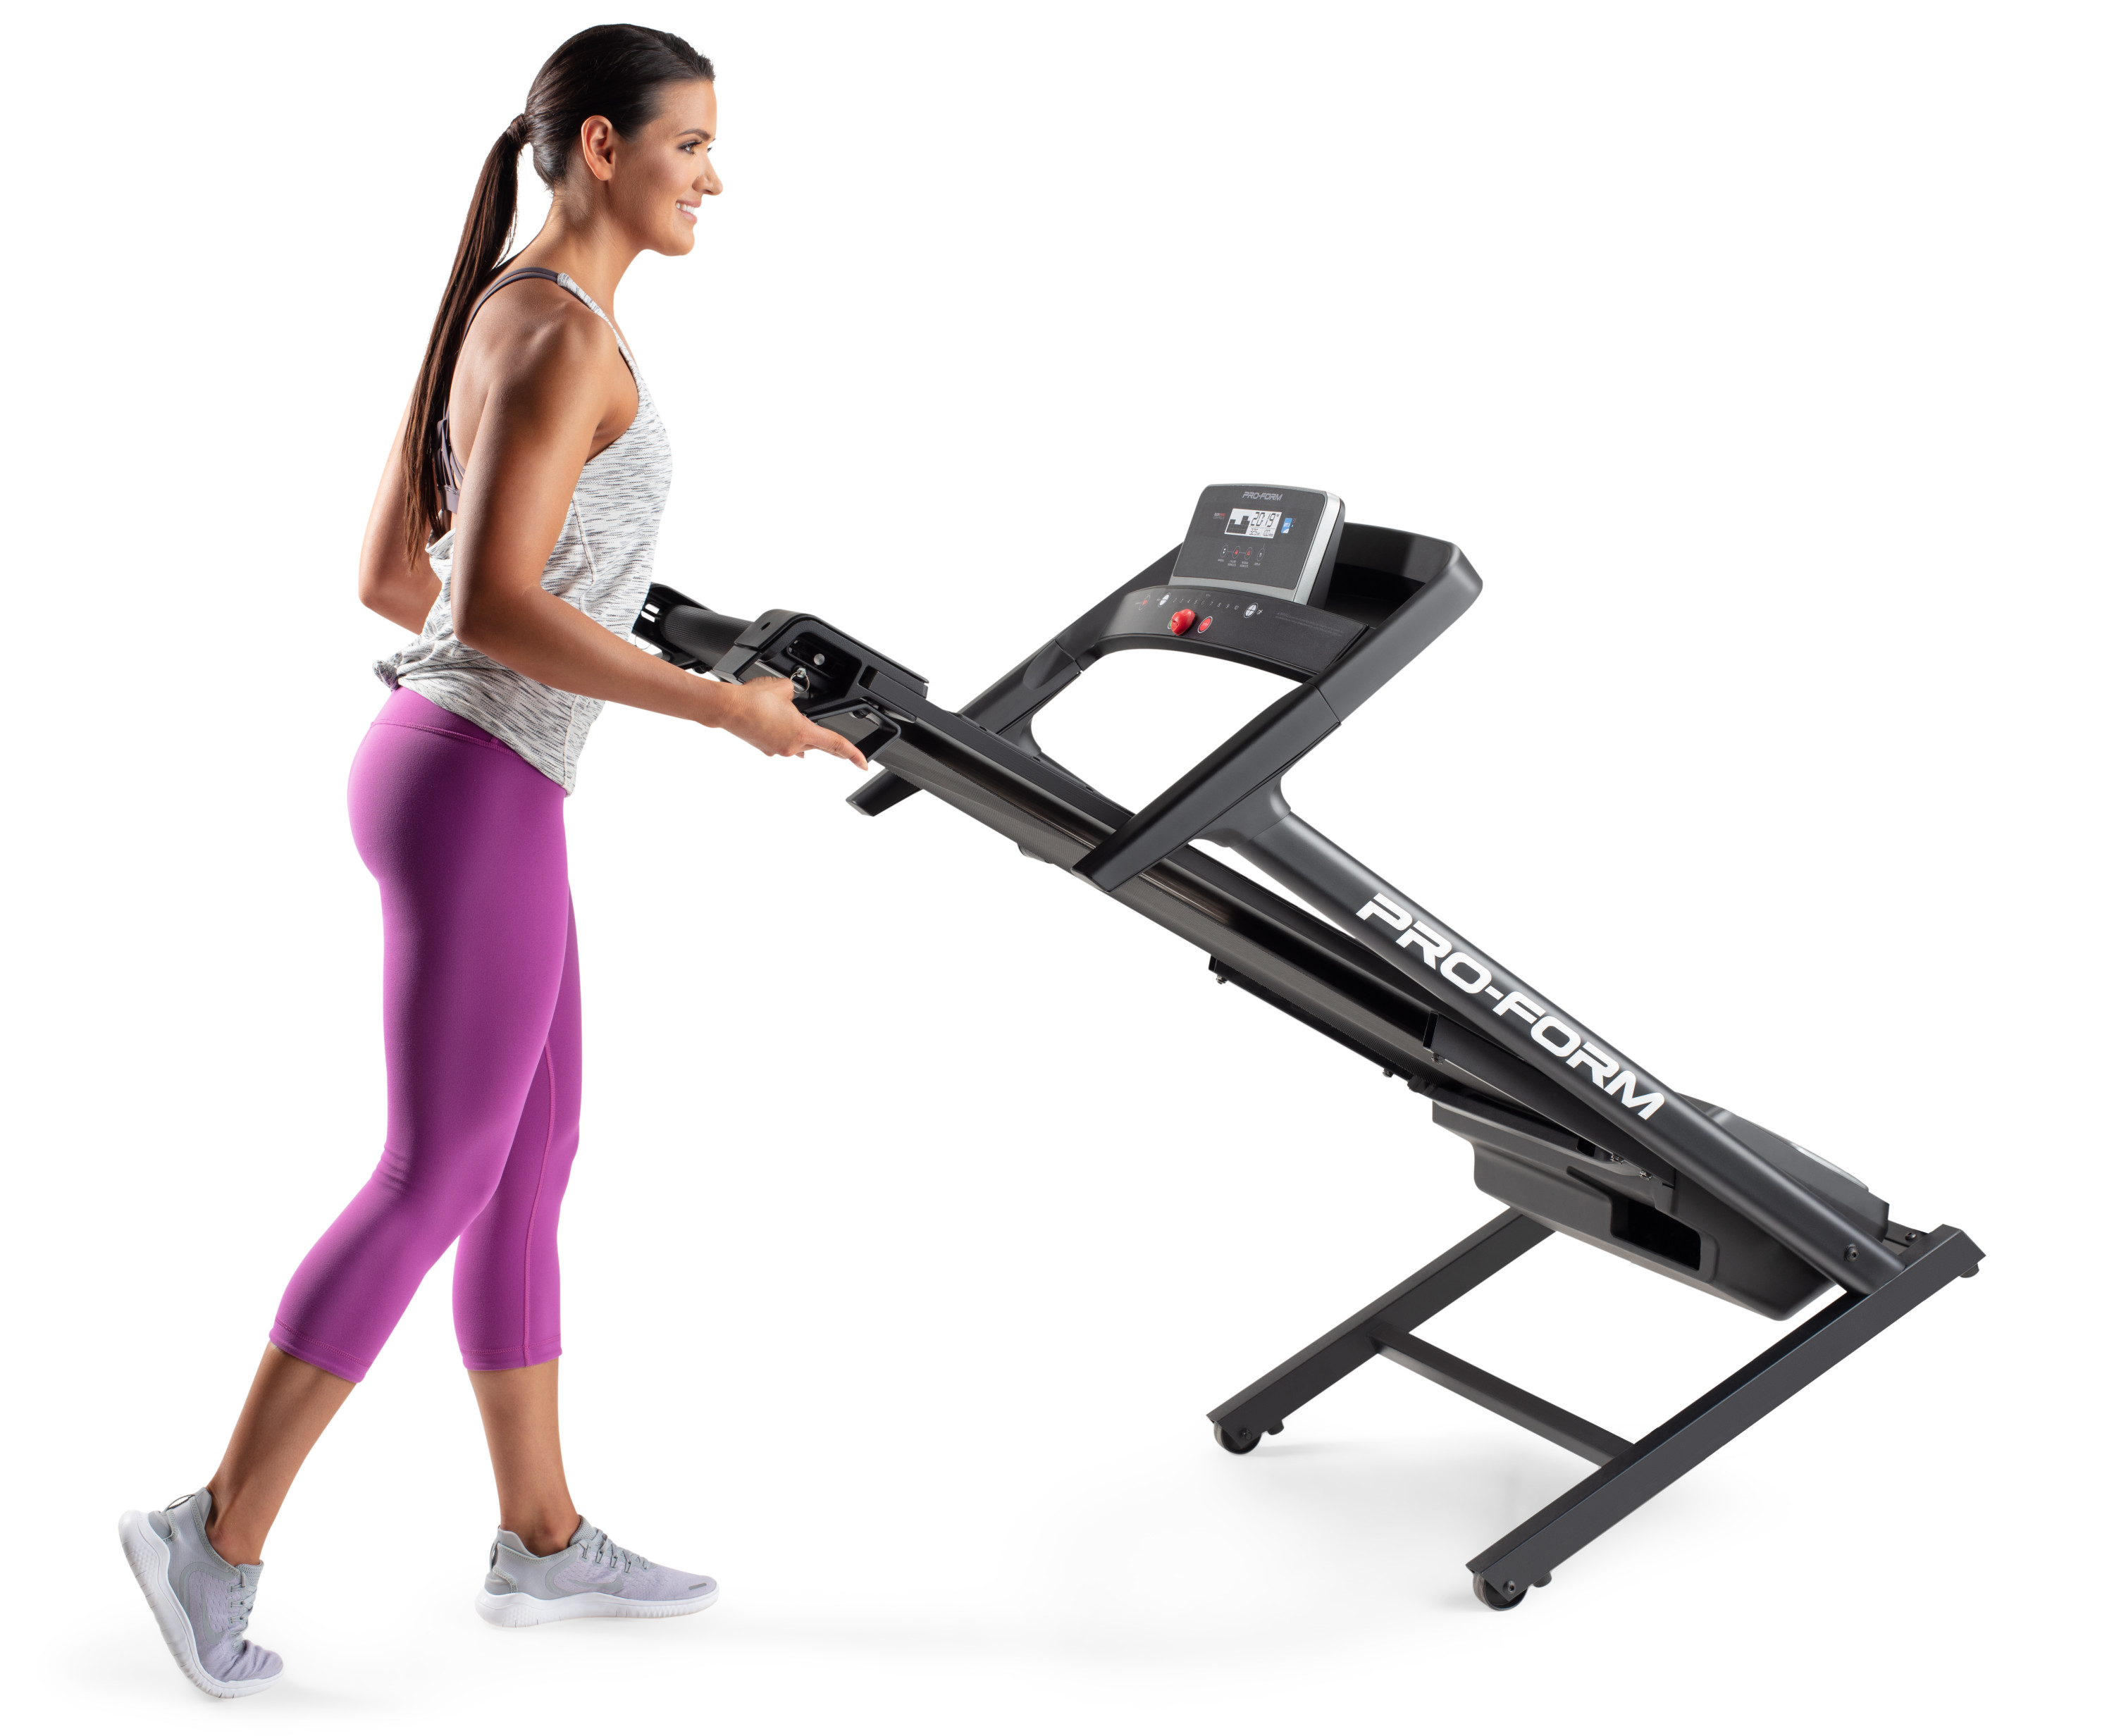 ProForm Cadence WLT Folding Treadmill with Reflex Deck for Walking and Jogging, iFit Bluetooth Enabled - image 20 of 31